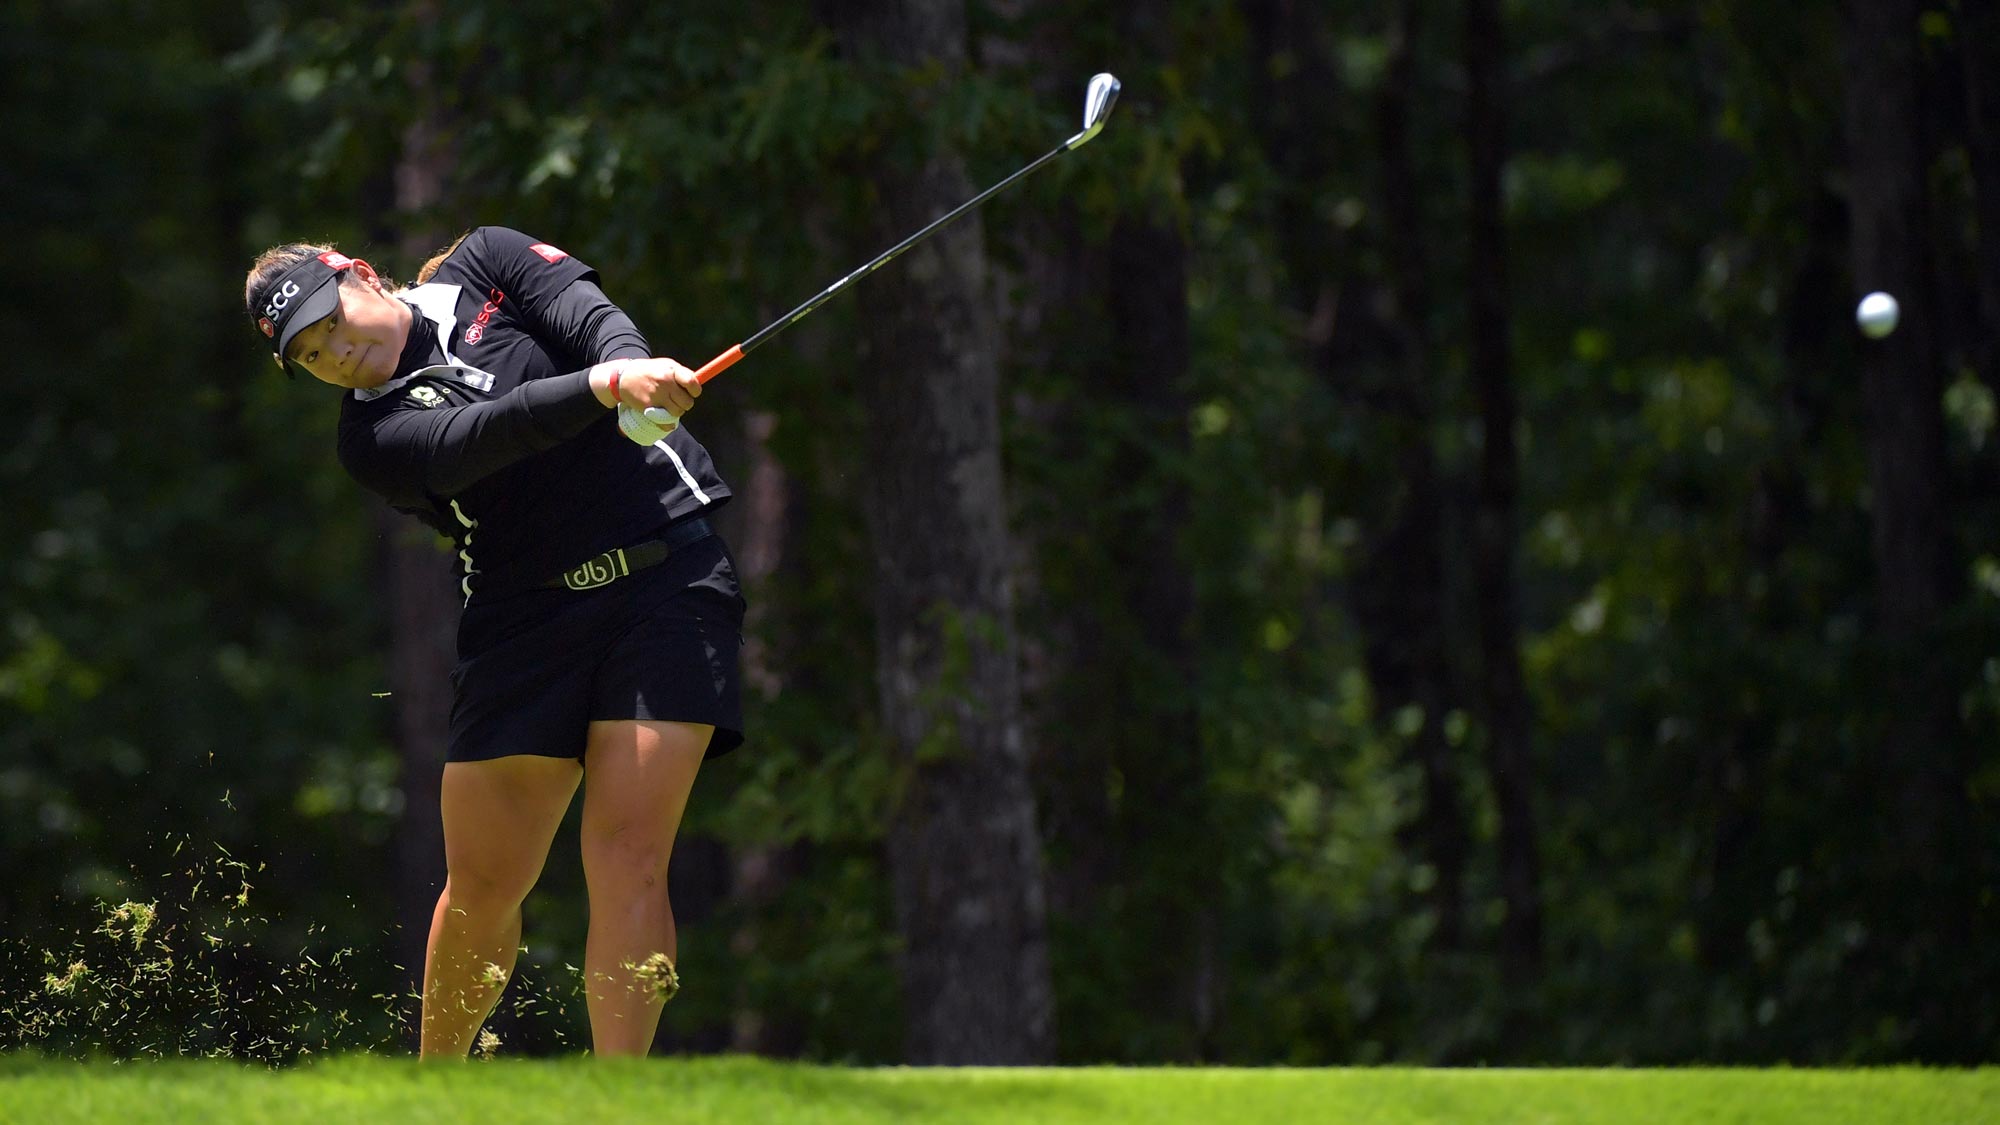 Ariya Jutanugarn of Thailand plays her tee shot on the second hole during the final round of the 2018 U.S. Women's Open